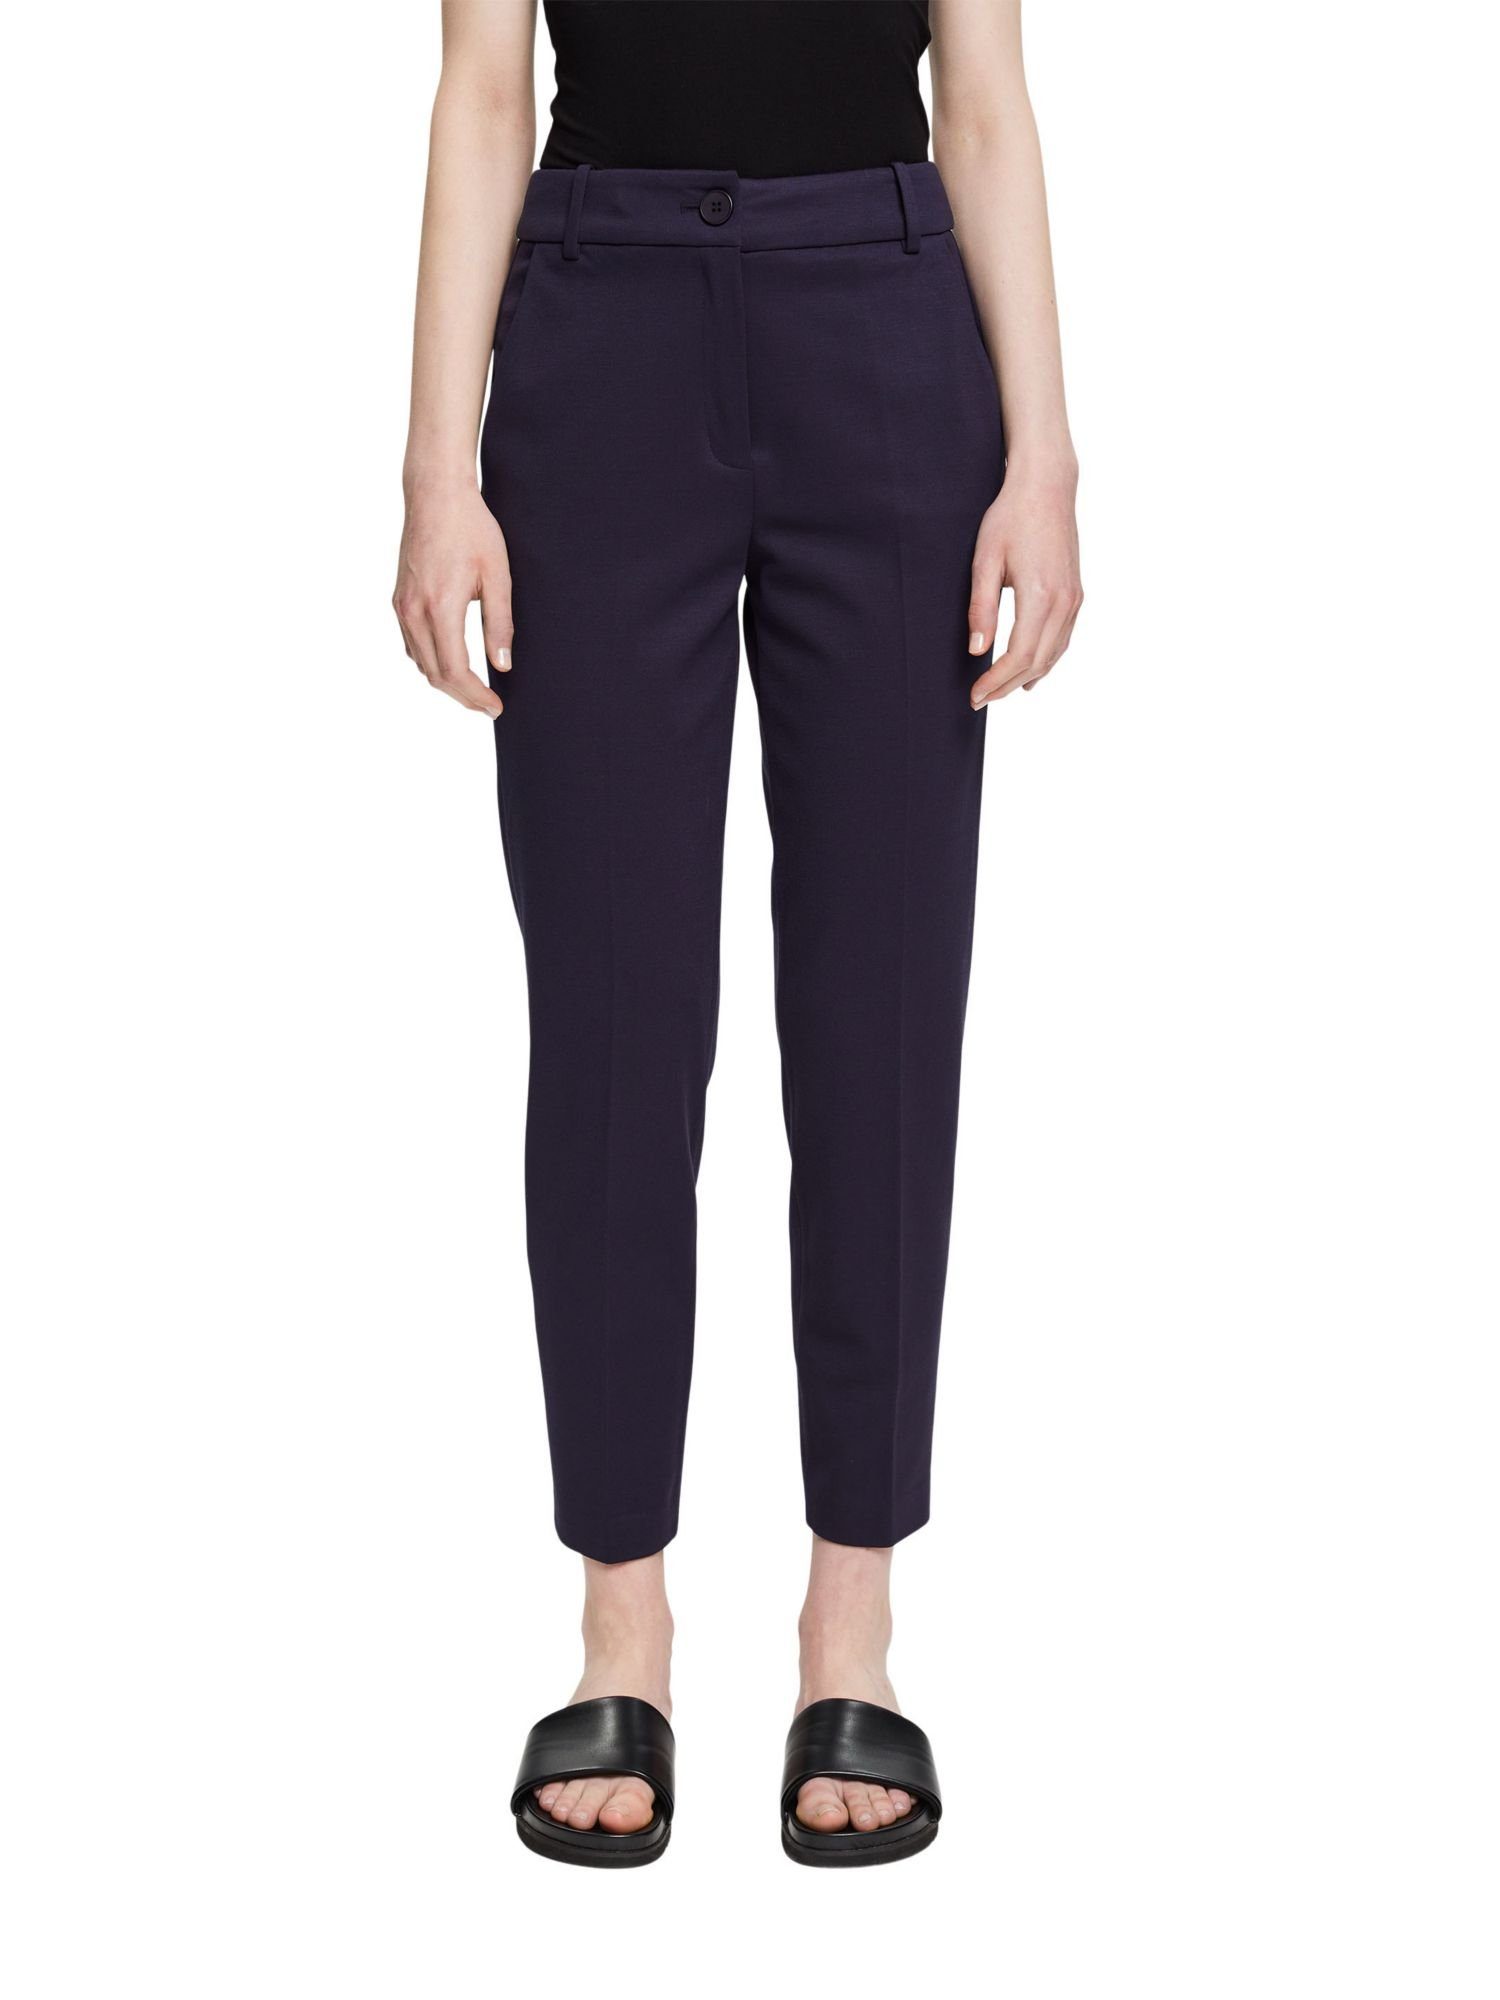 Stretch-Hose Pants Mix PUNTO Esprit SPORTY Collection NAVY & Match Tapered